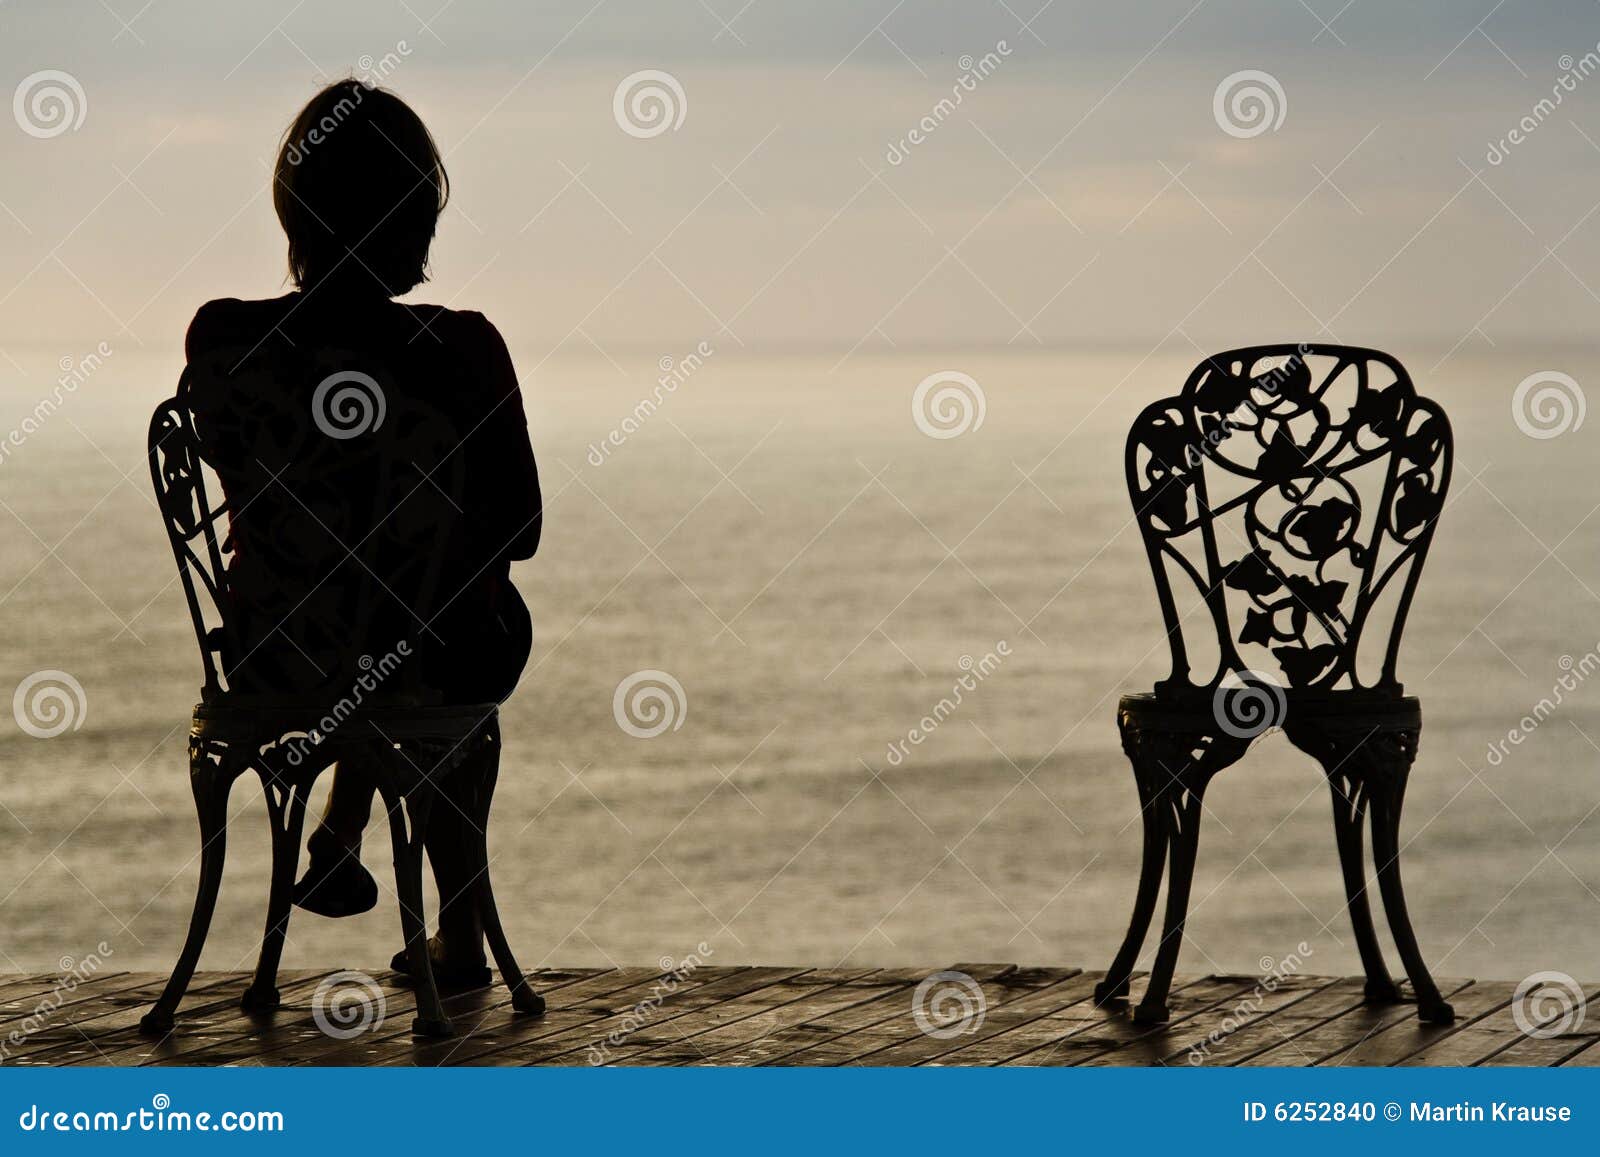 Lonely girl on a chair stock photo. Image of destination - 6252840